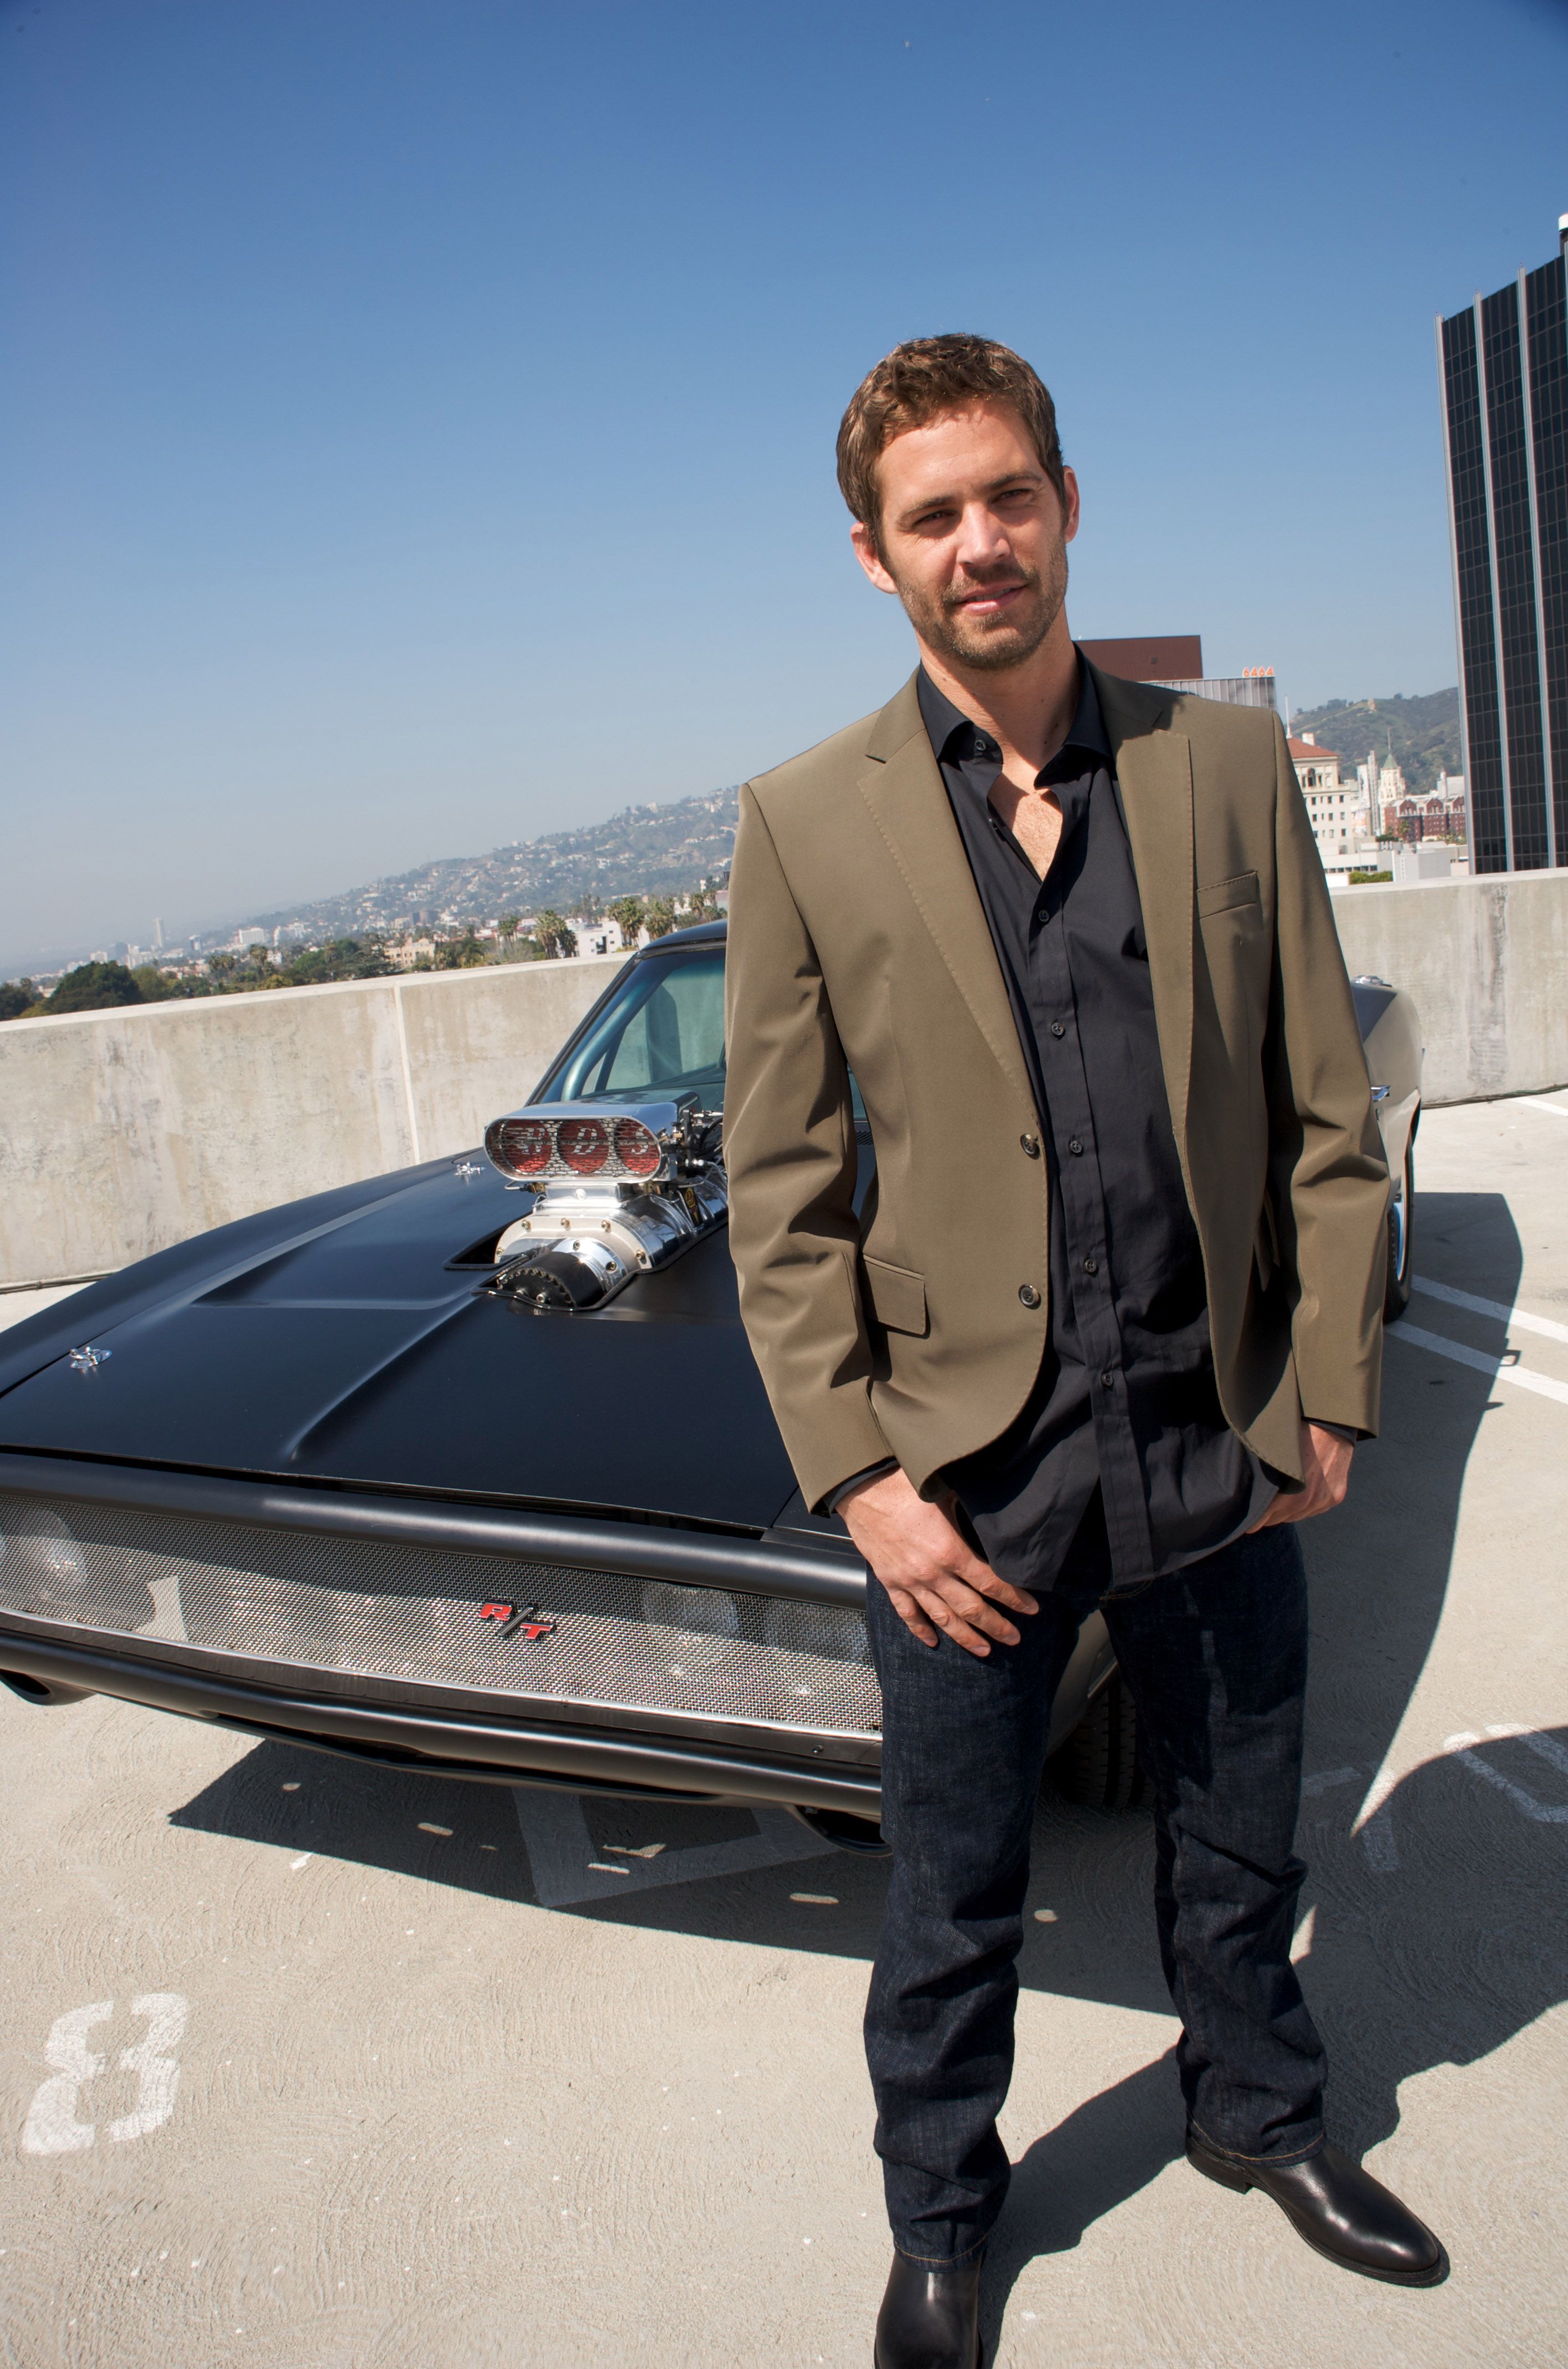 Paul Walker at the "Fast & Furious" press conference on March 13, 2009, in Hollywood, California | Photo: Vera Anderson/WireImage/Getty Images